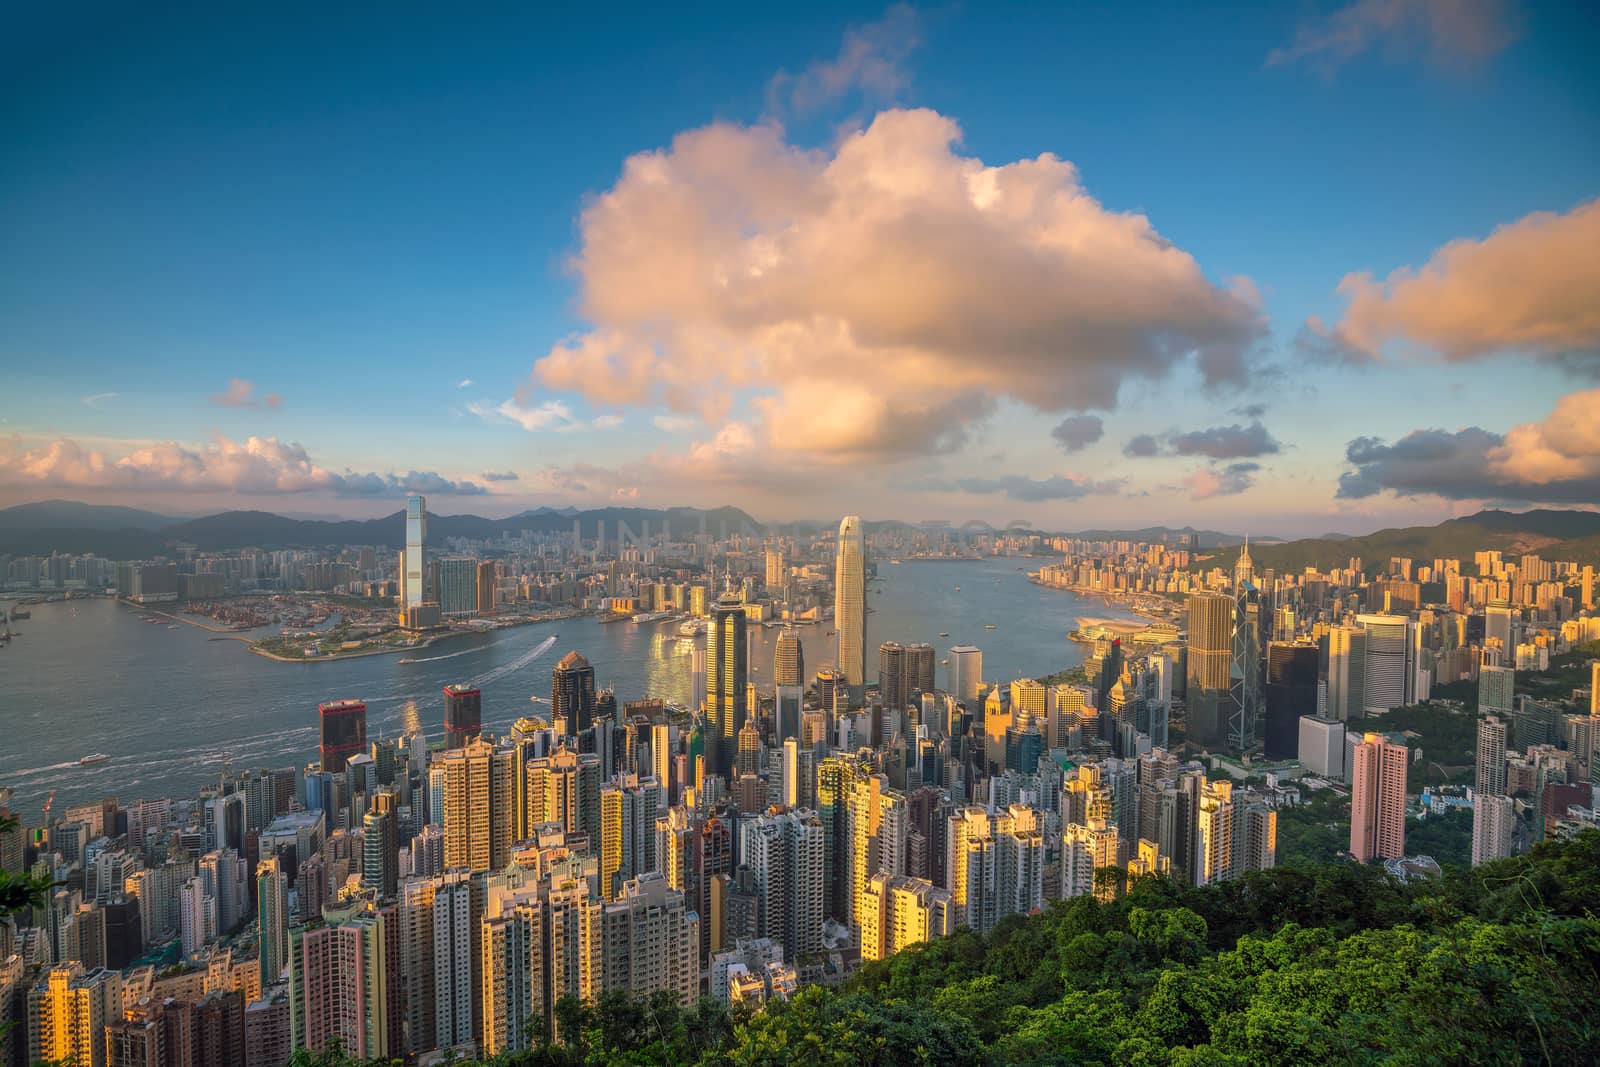 Panoramic view of Victoria Harbor and Hong Kong skyline by f11photo